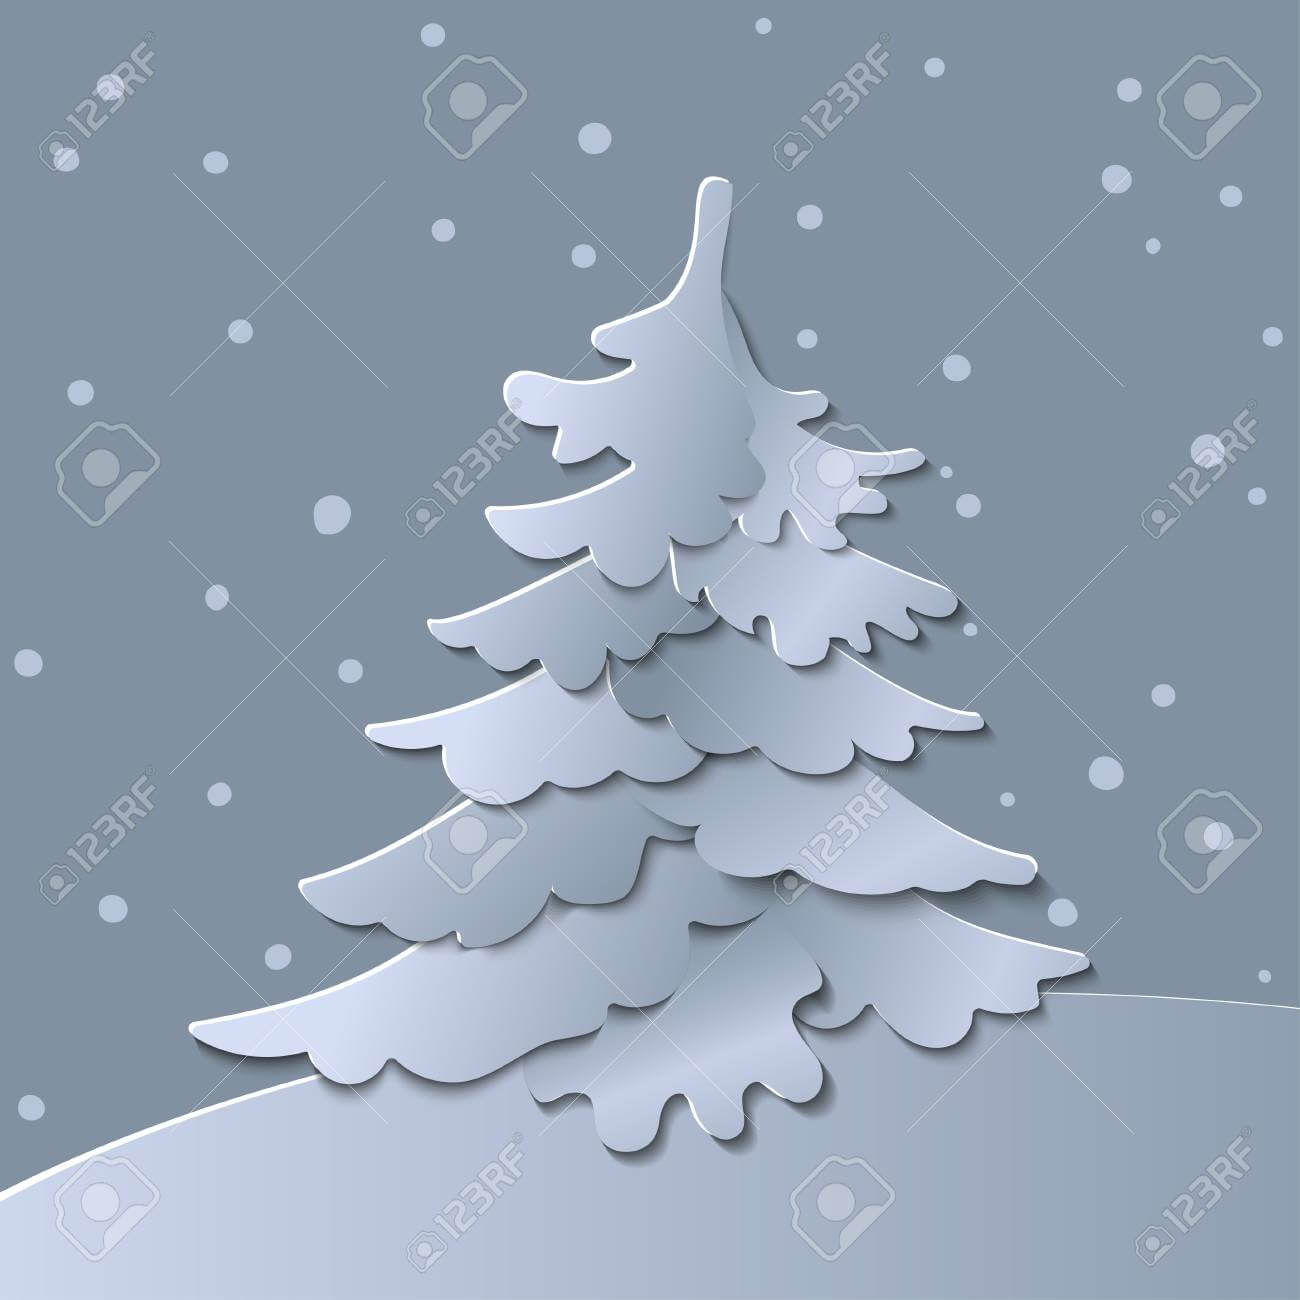 3D Abstract Paper Cut Illustration Of Christmas Tree. Vector.. Inside 3D Christmas Tree Card Template